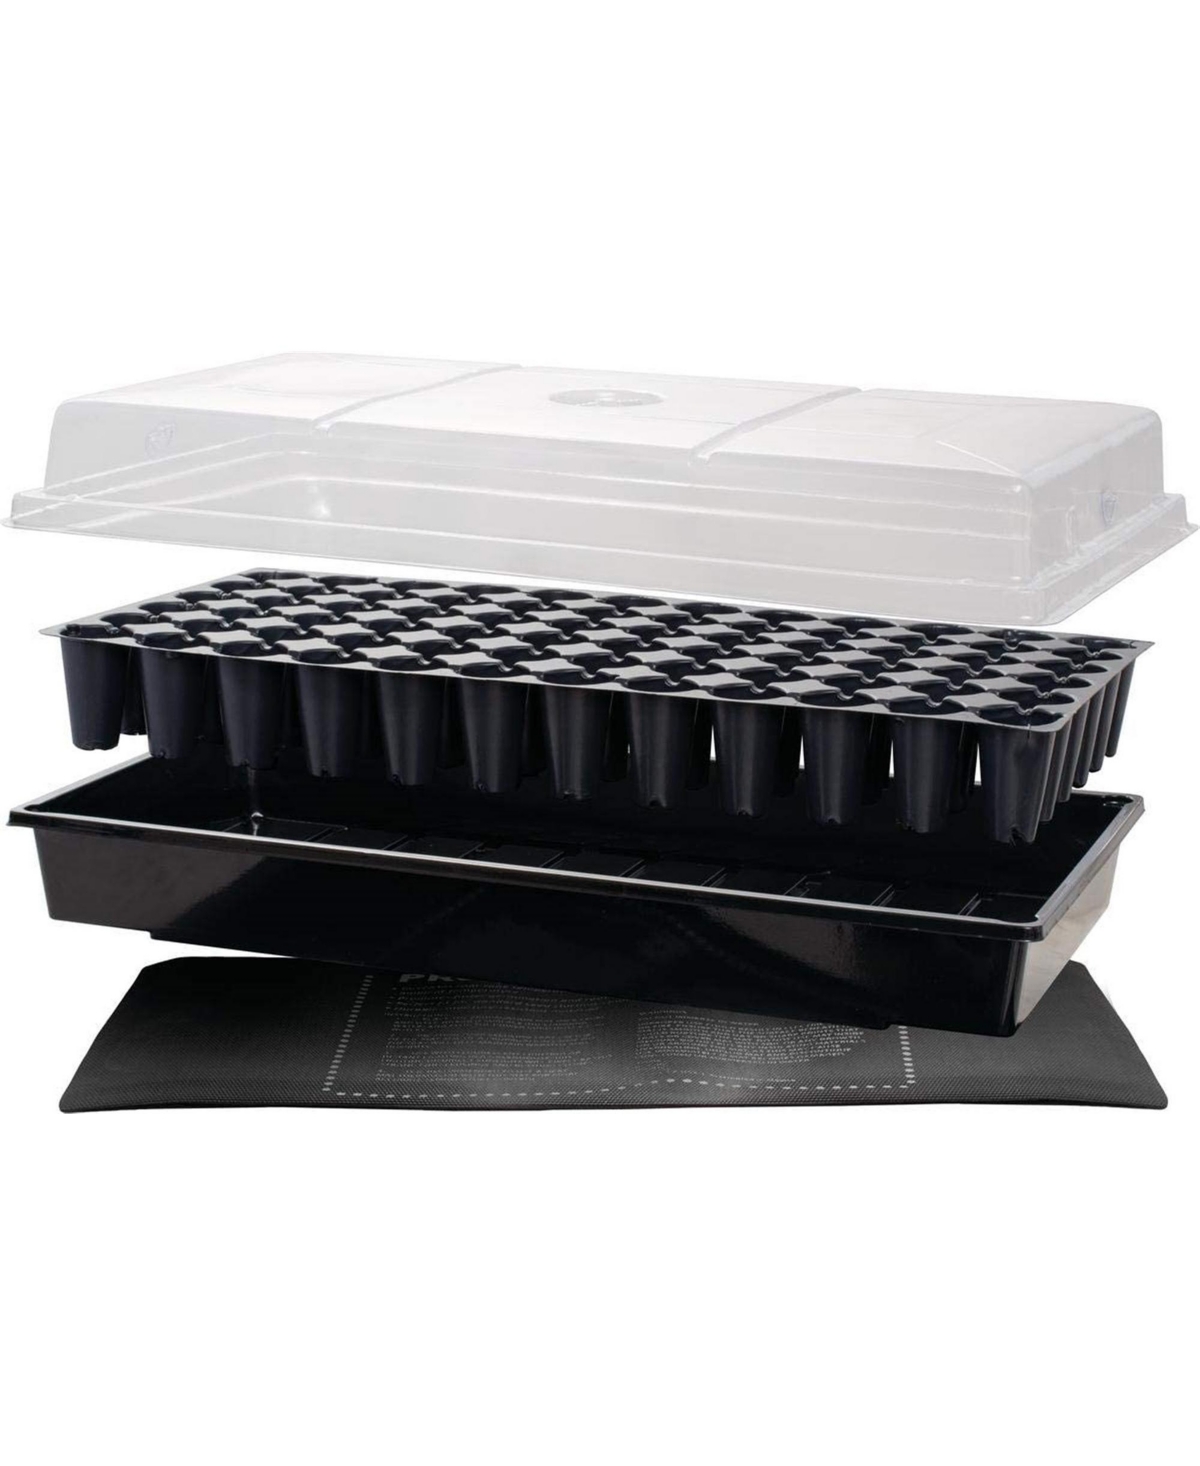 Germination Station 72 Cell Tray and Dome - Multi